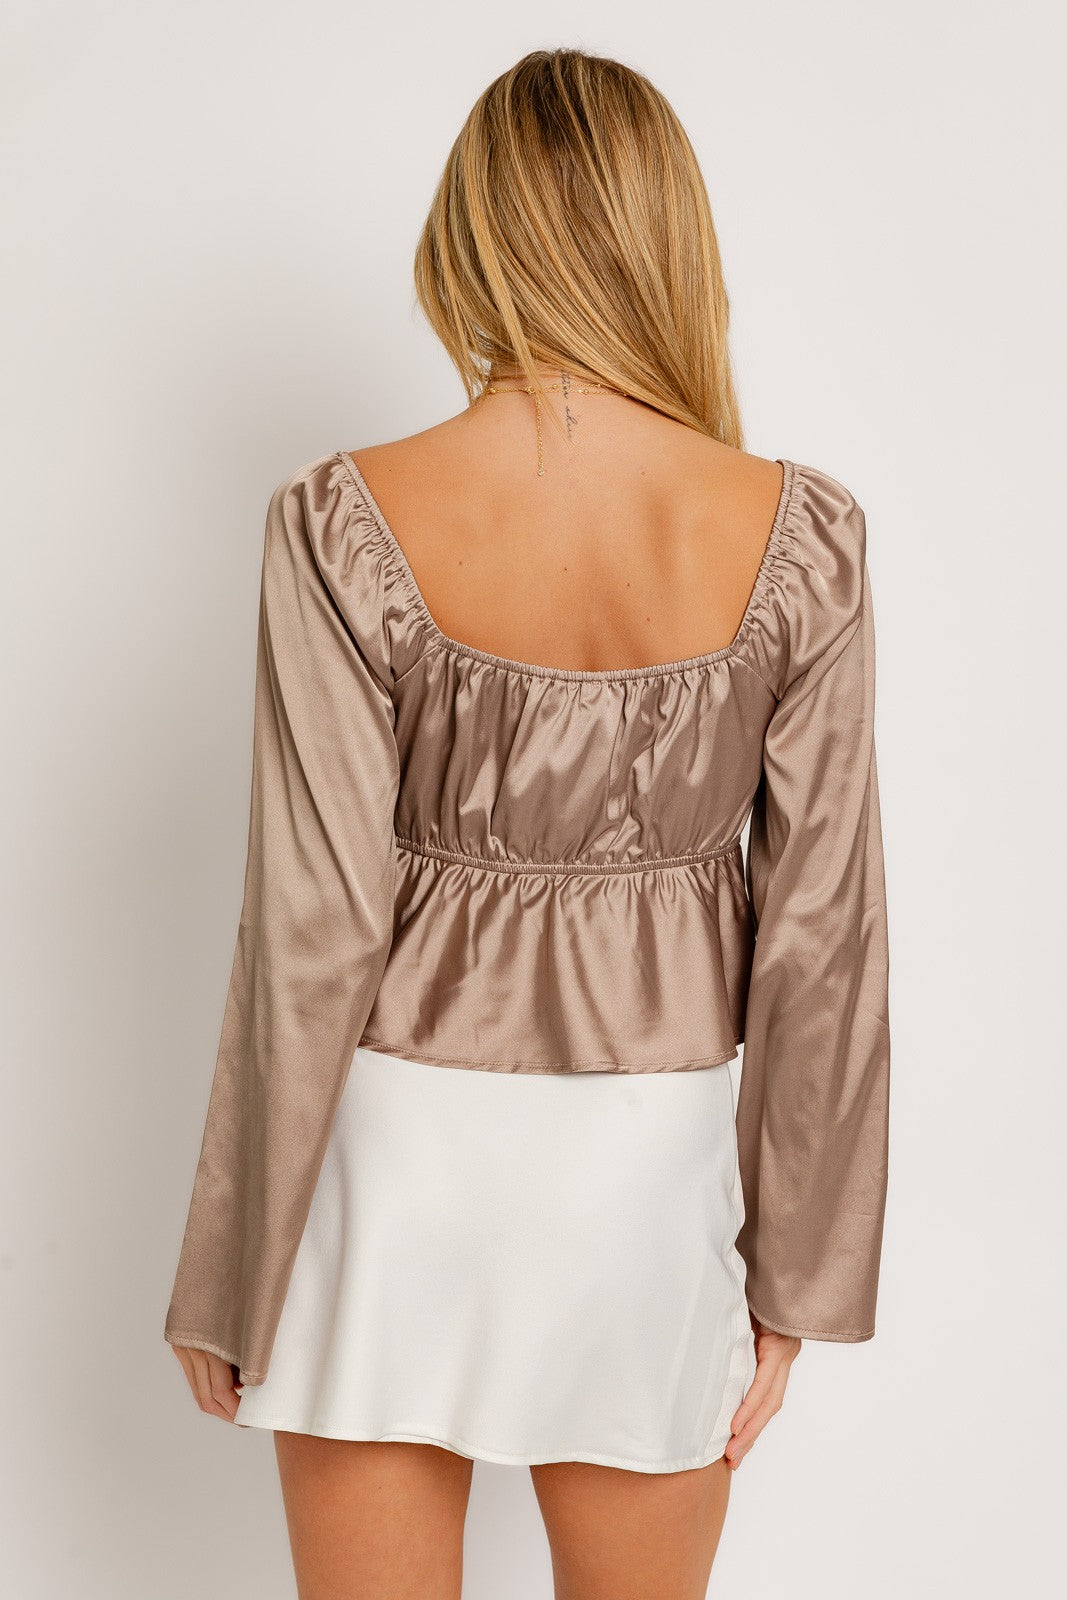 Taupe Sweetheart Lace Trim Top